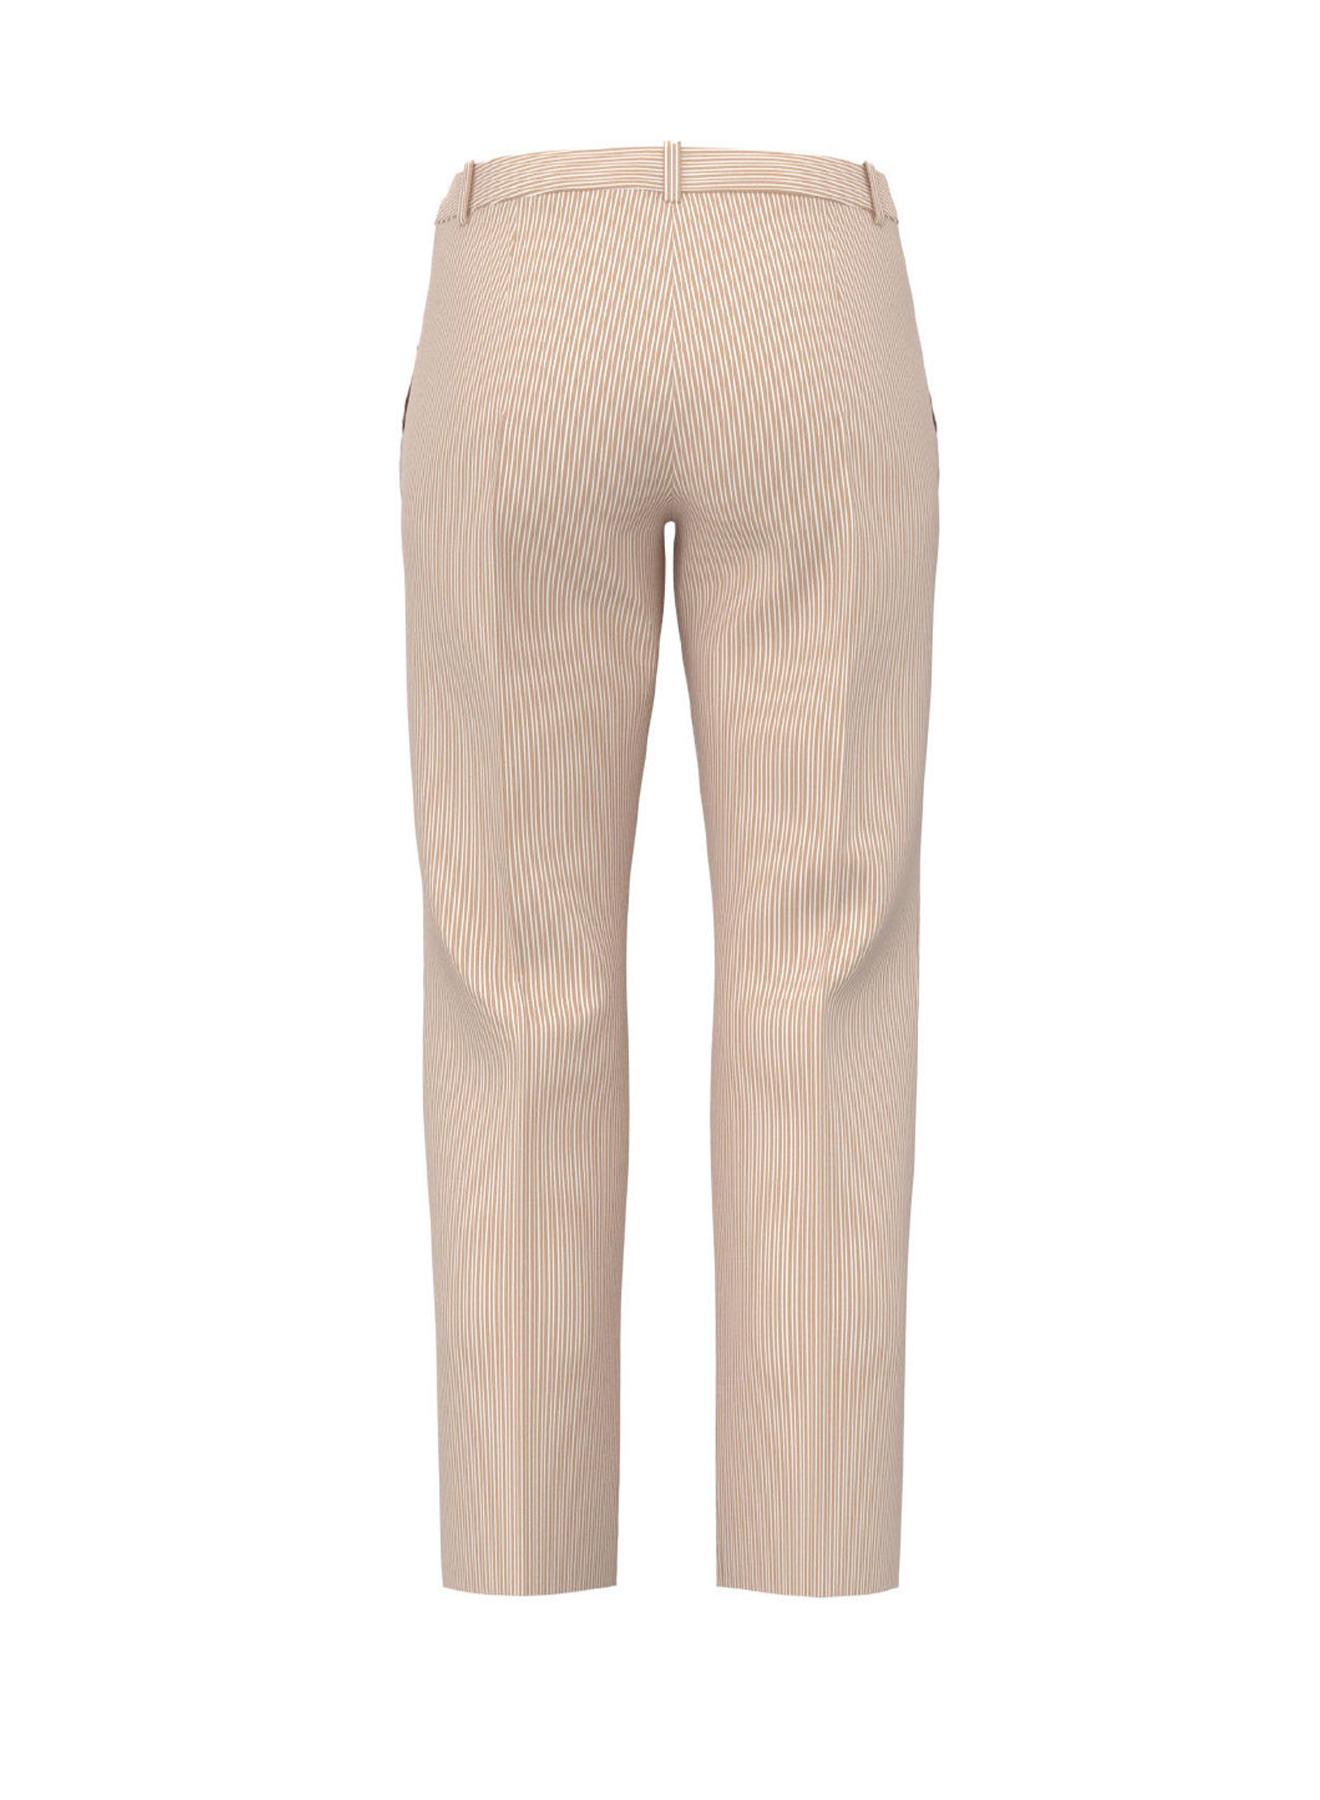 Striped cotton pants with a satin texture - 3